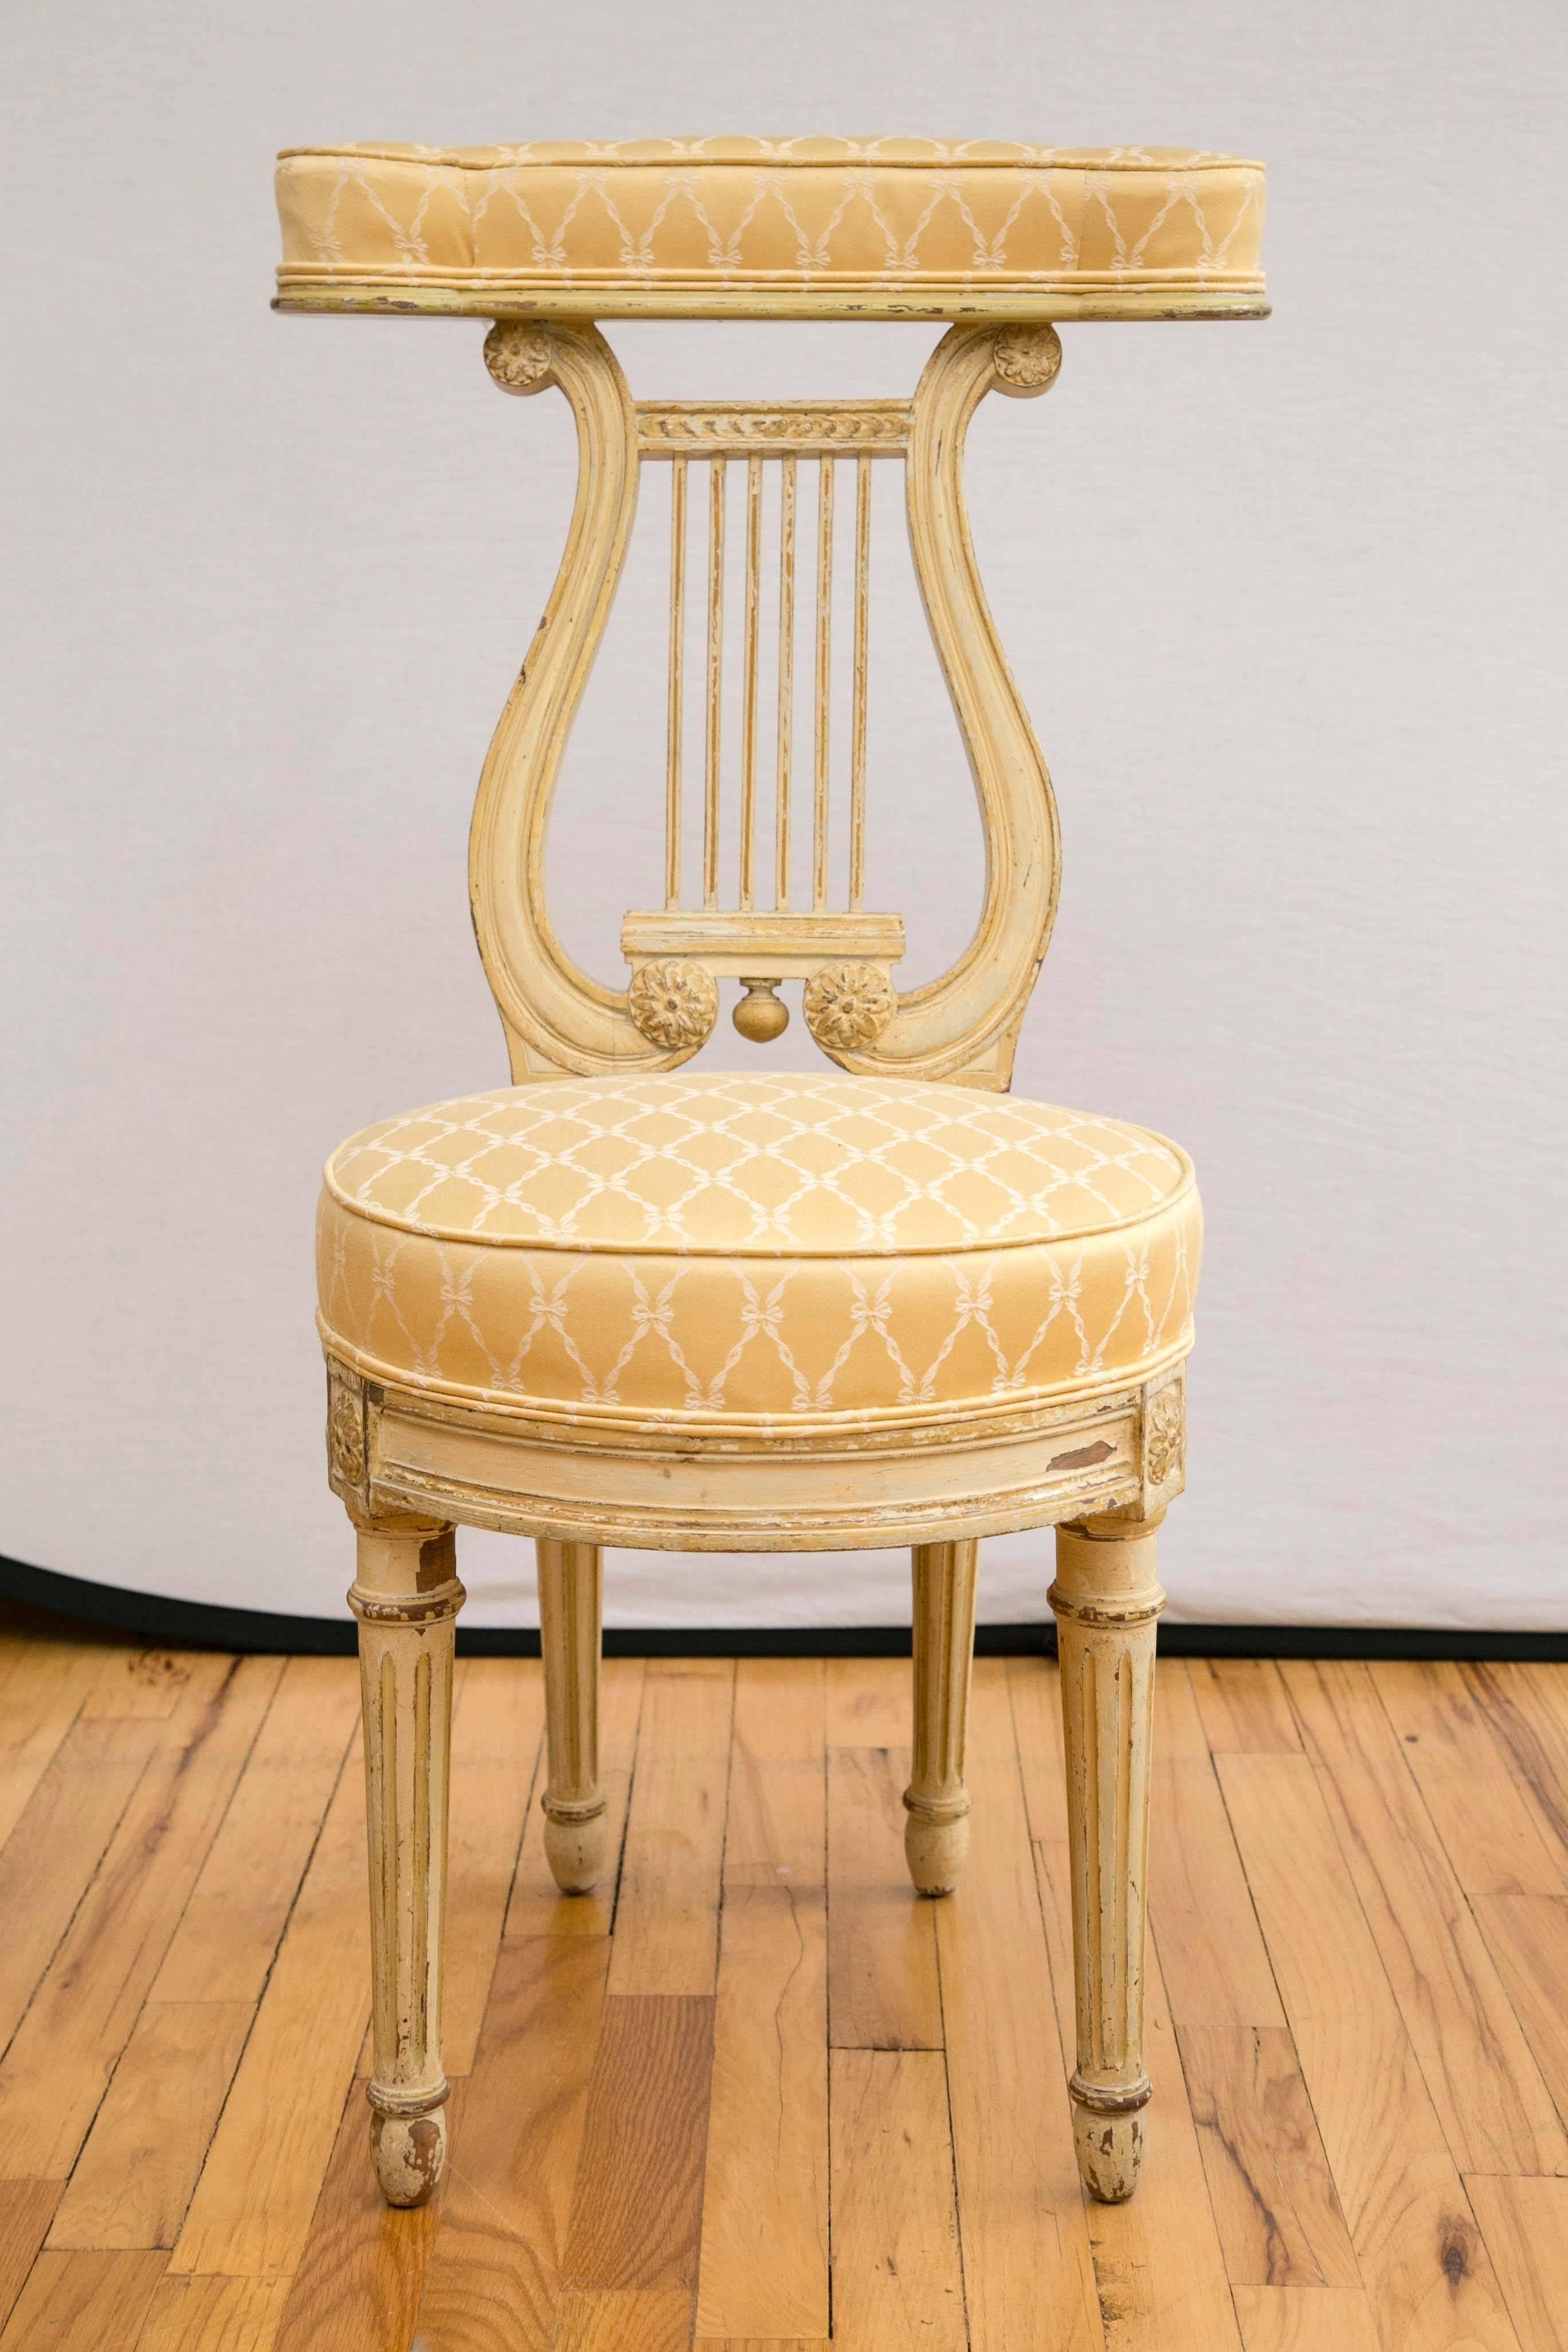 A cream painted wood, yellow upholstered voyeuse. A chair on which a 